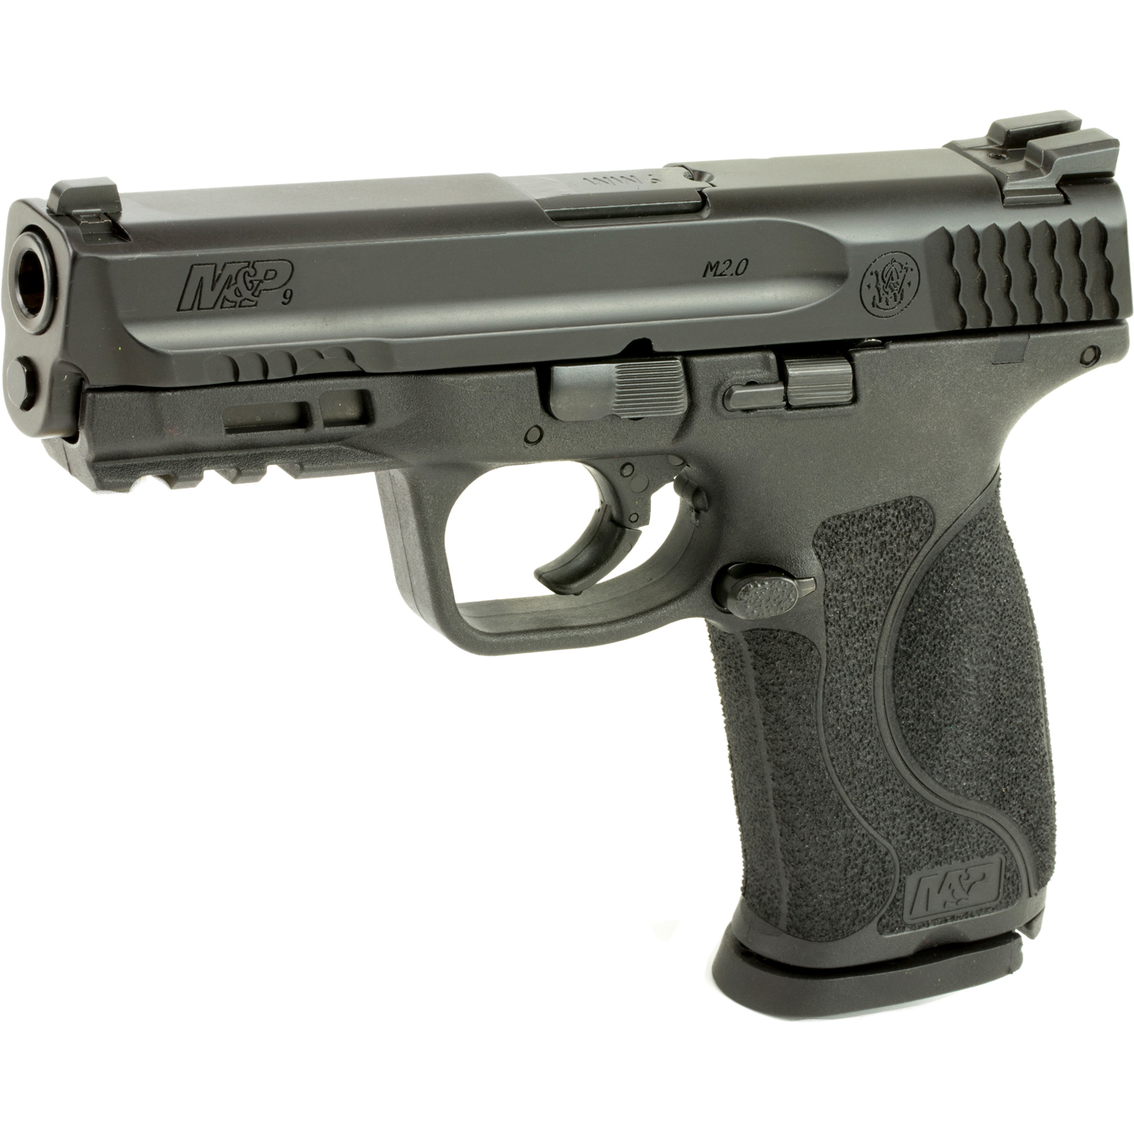 S&W M&P 2.0 9MM 4.25 in. Barrel 17 Rds 3-Mags Pistol Black - Image 3 of 3